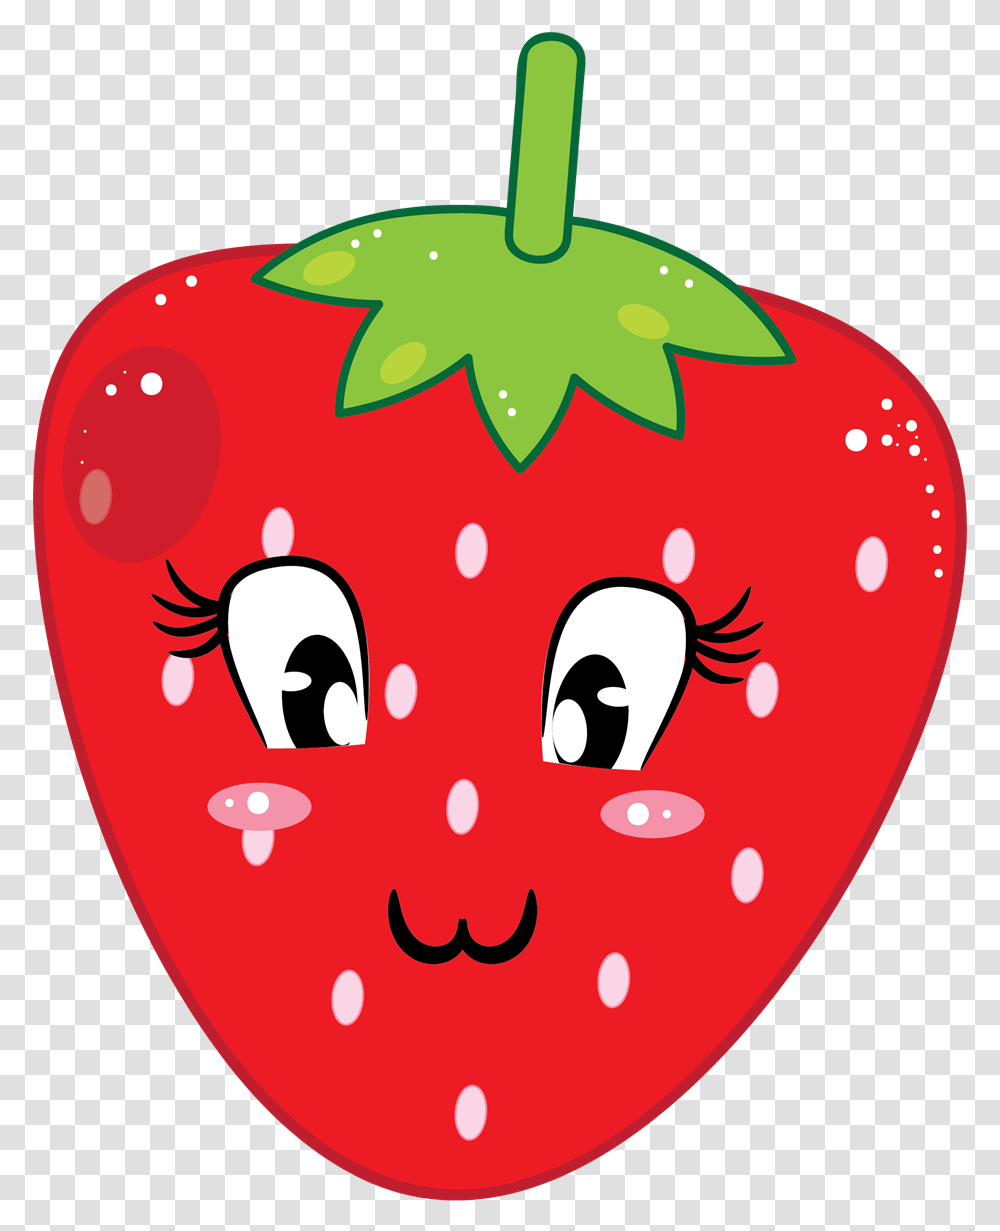 This Cute Cartoon Strawberry Strawberry Clipart Cute, Plant, Food, Vegetable, Birthday Cake Transparent Png